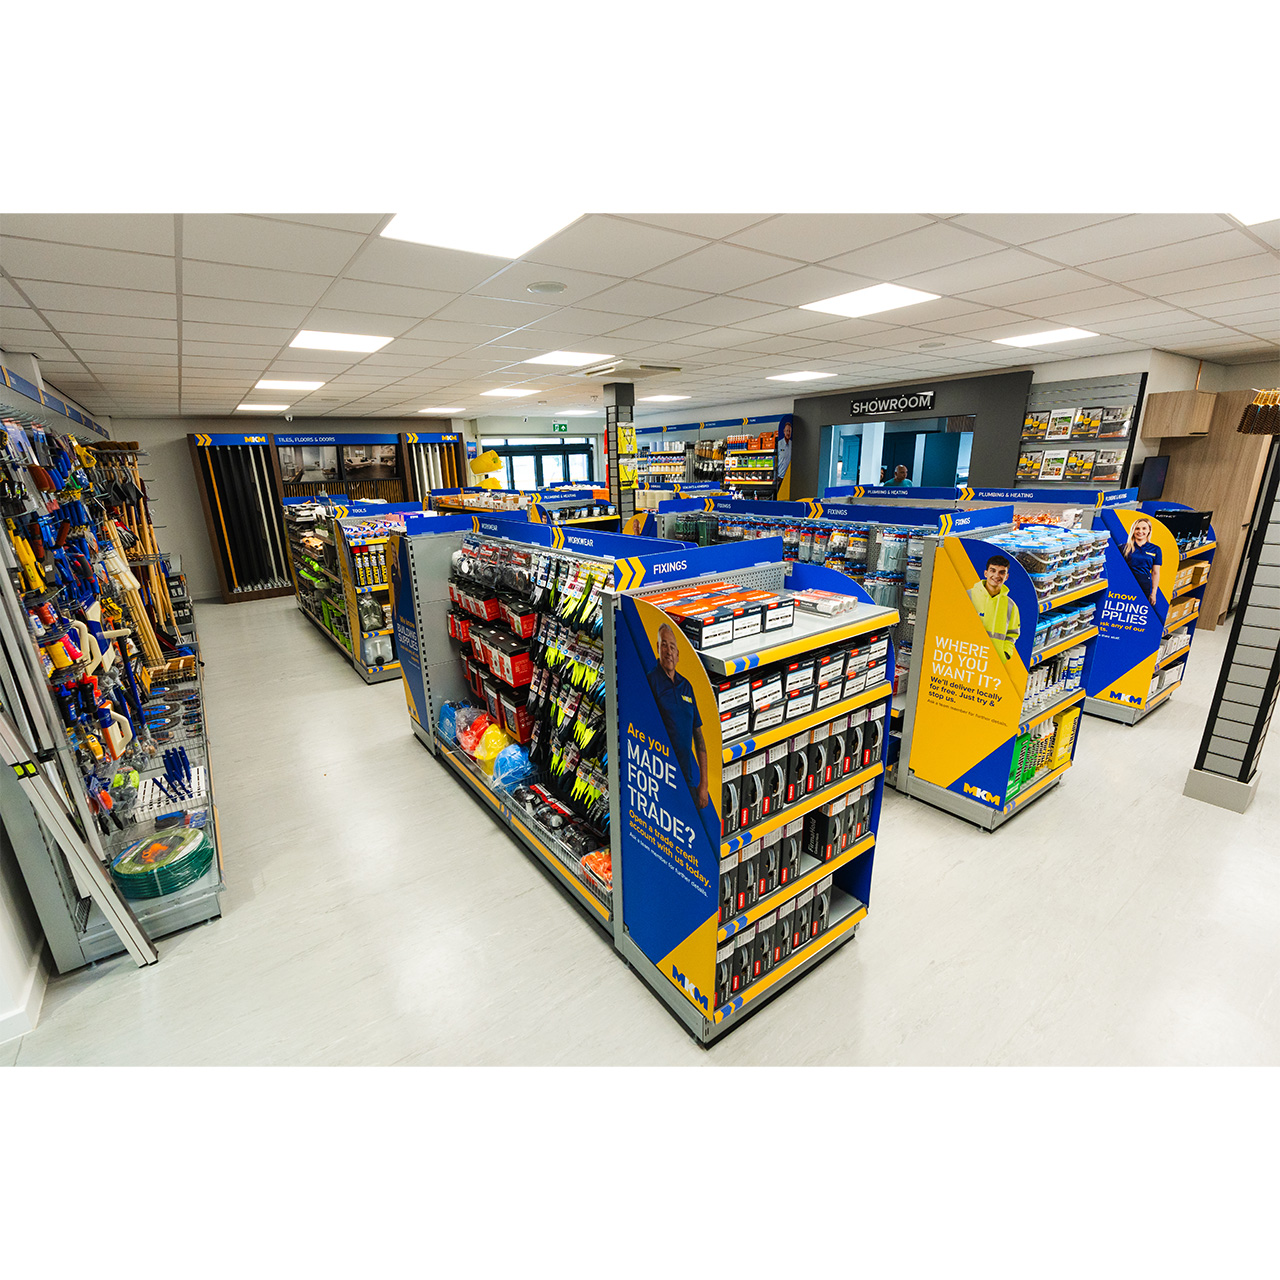 Images MKM Building Supplies Chichester